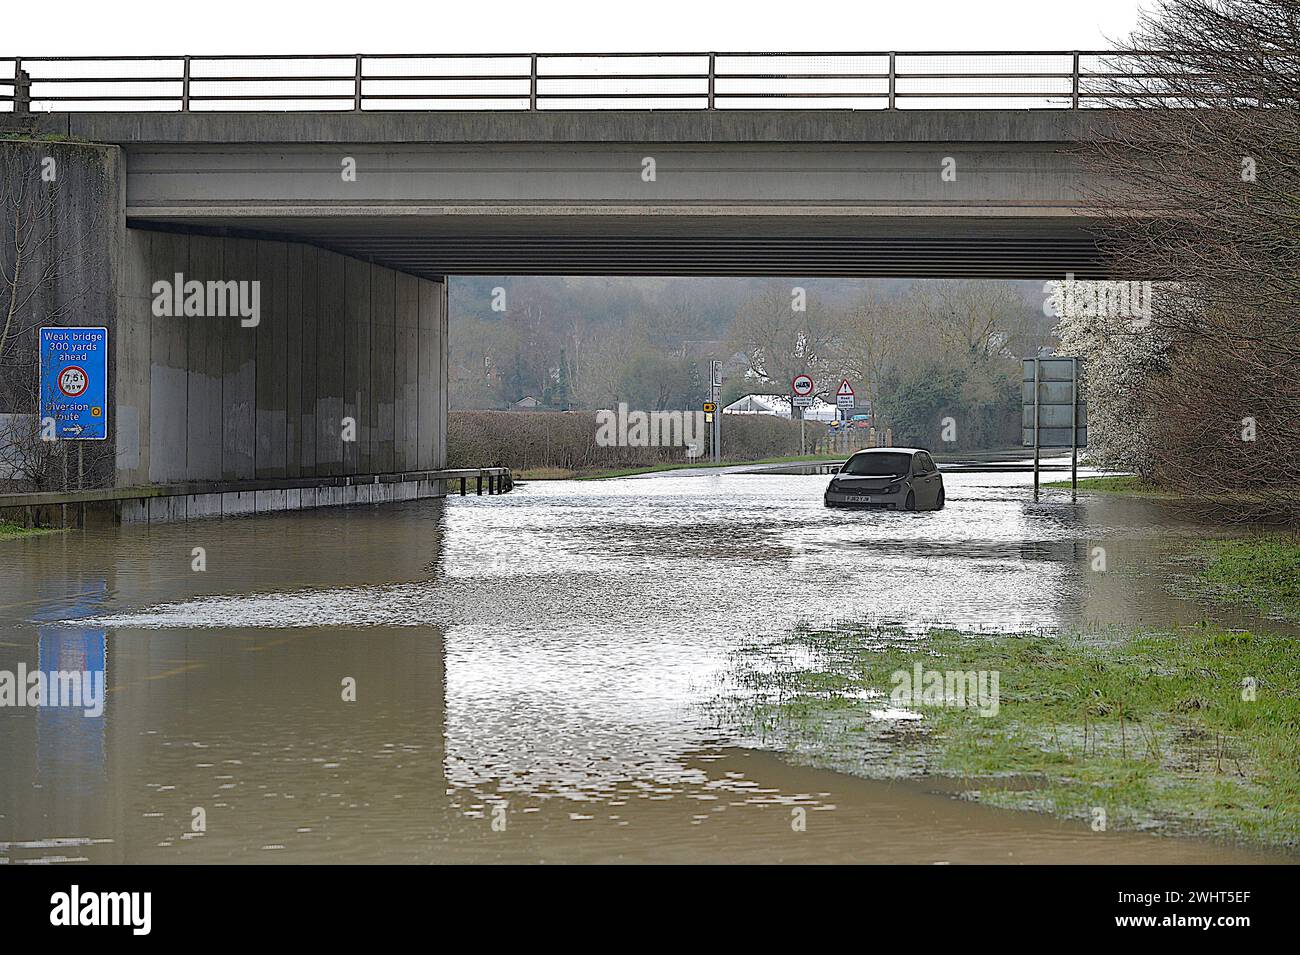 Mountsorrel, Leicestershire, UK, 11th February 2024.  Leicestershire still struggles to recover from the rains with widespread flooding from the River Soar. A vehicle abandoned in the floodwater on Sileby Lane, Mountsorrel. Credit: Chris De Bretton-Gordon / Alamy Live News. Stock Photo